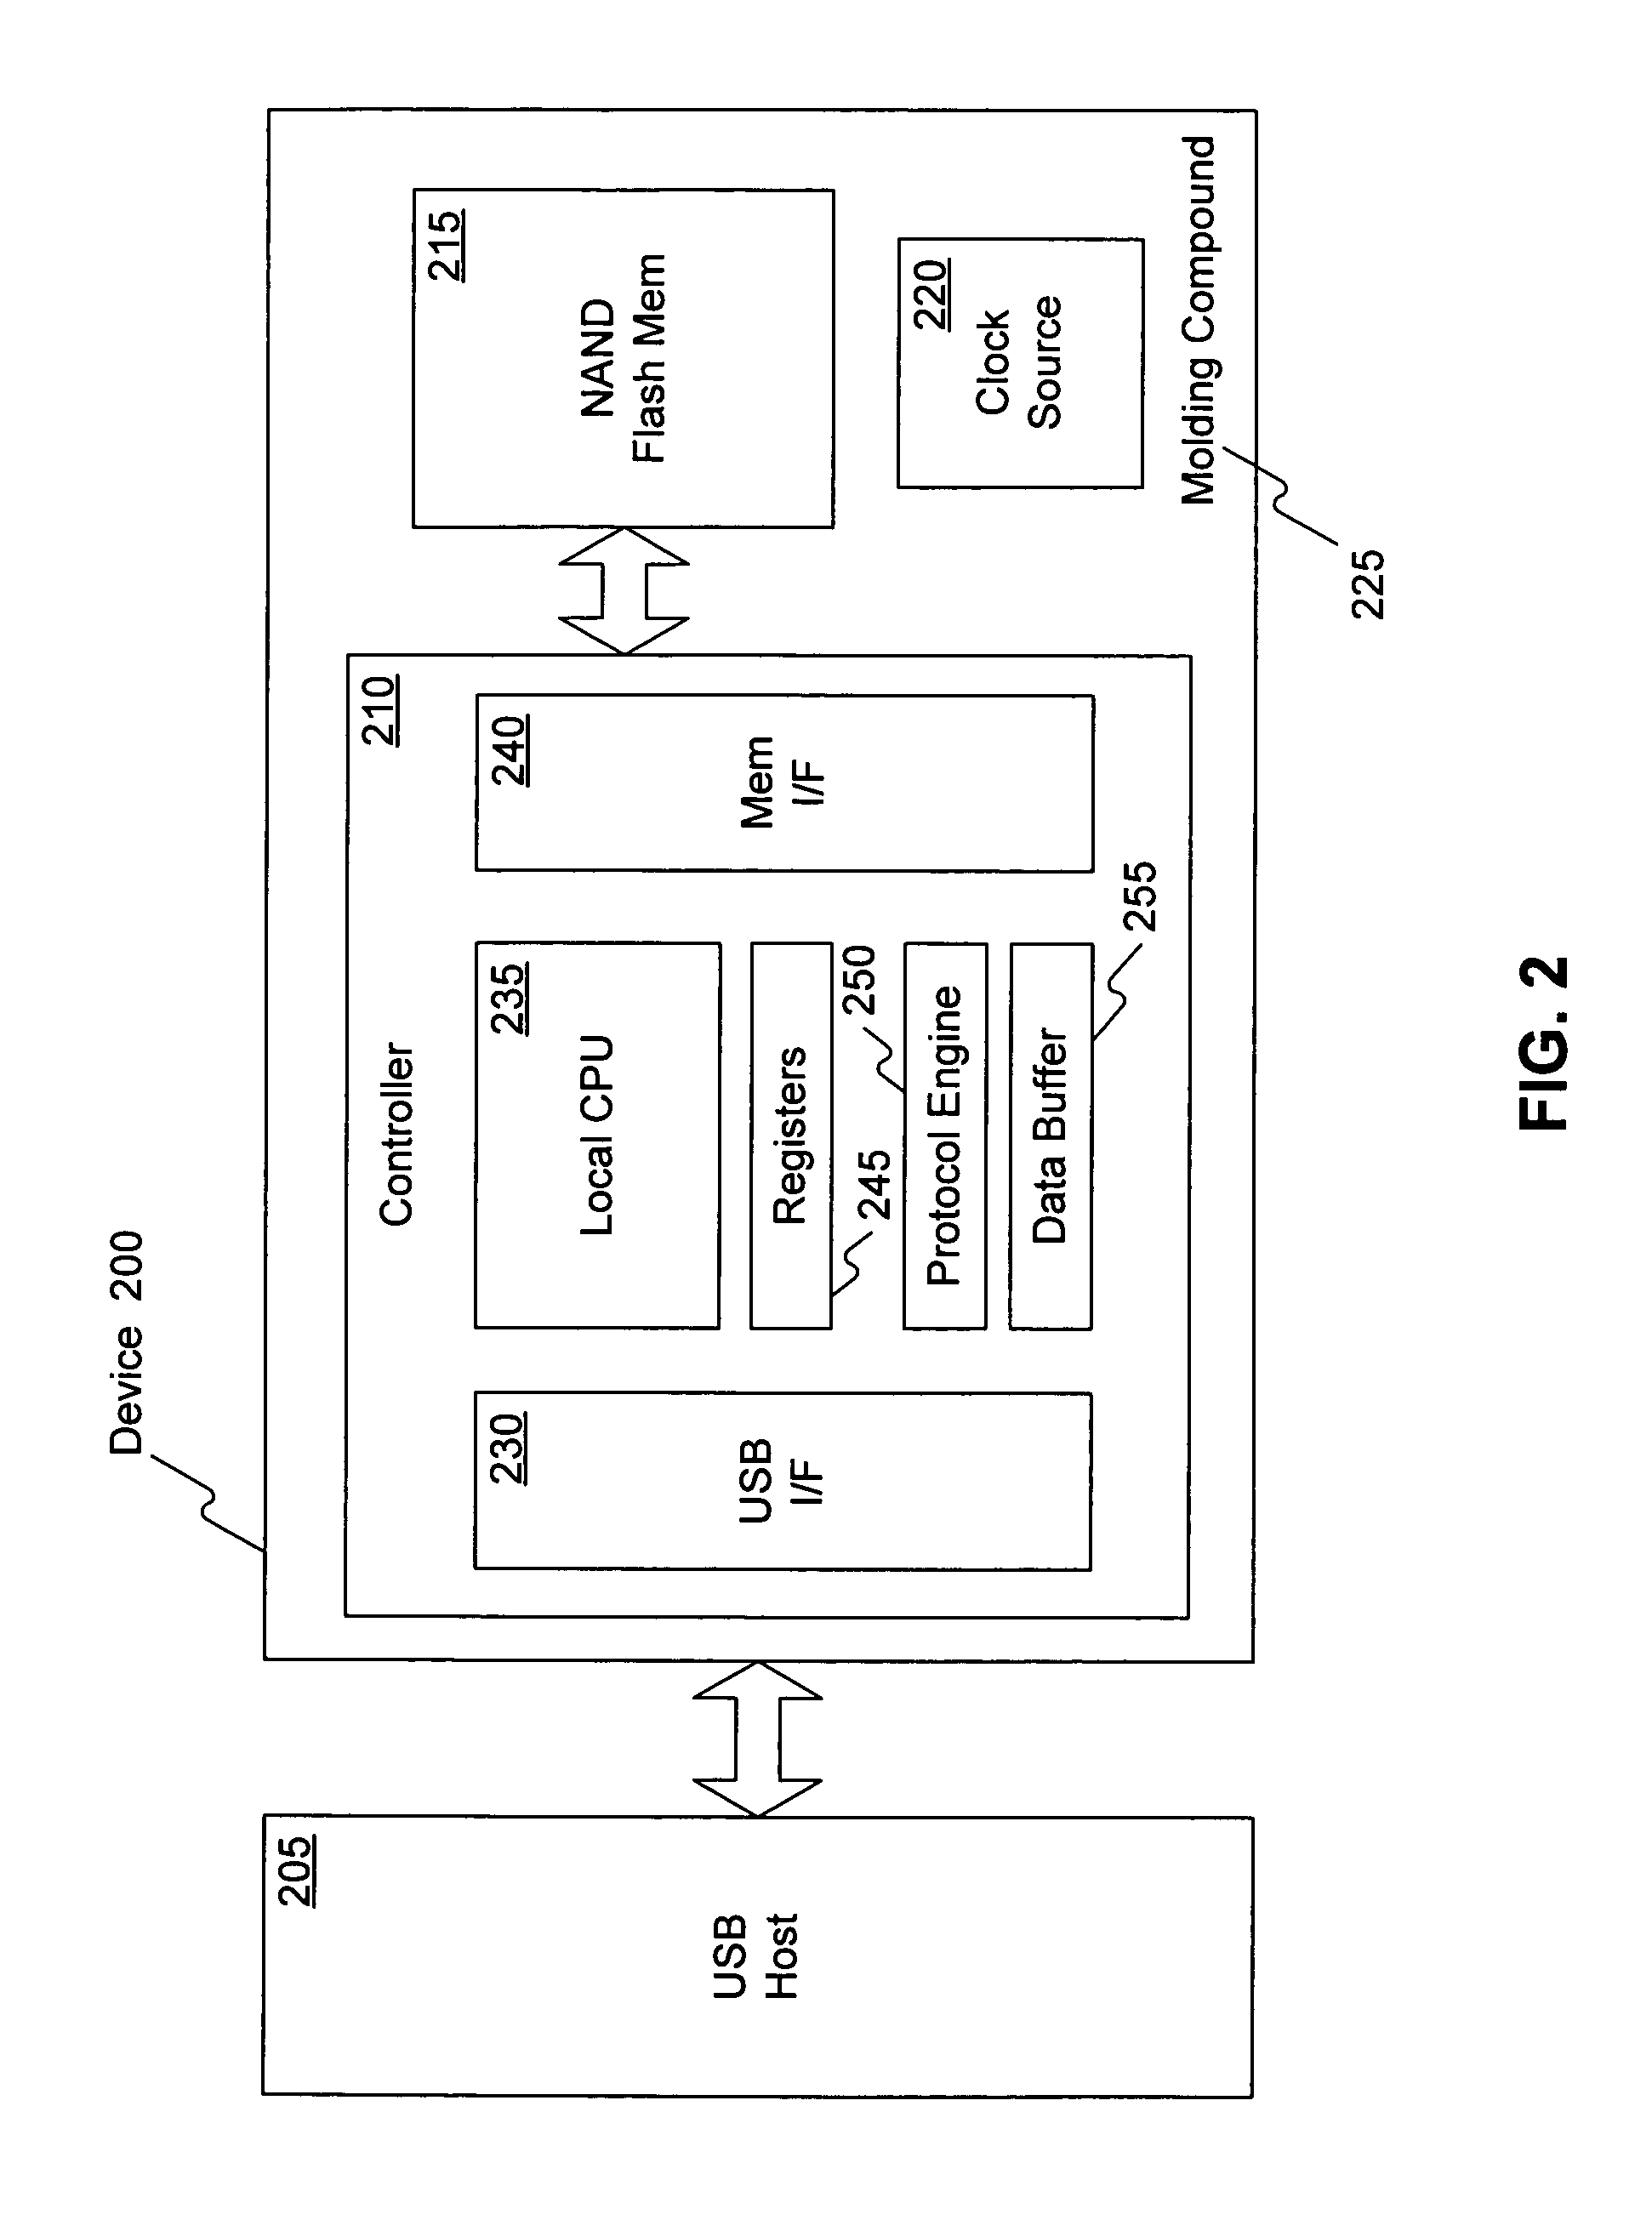 USB memory storage apparatus with integrated circuit in a connector